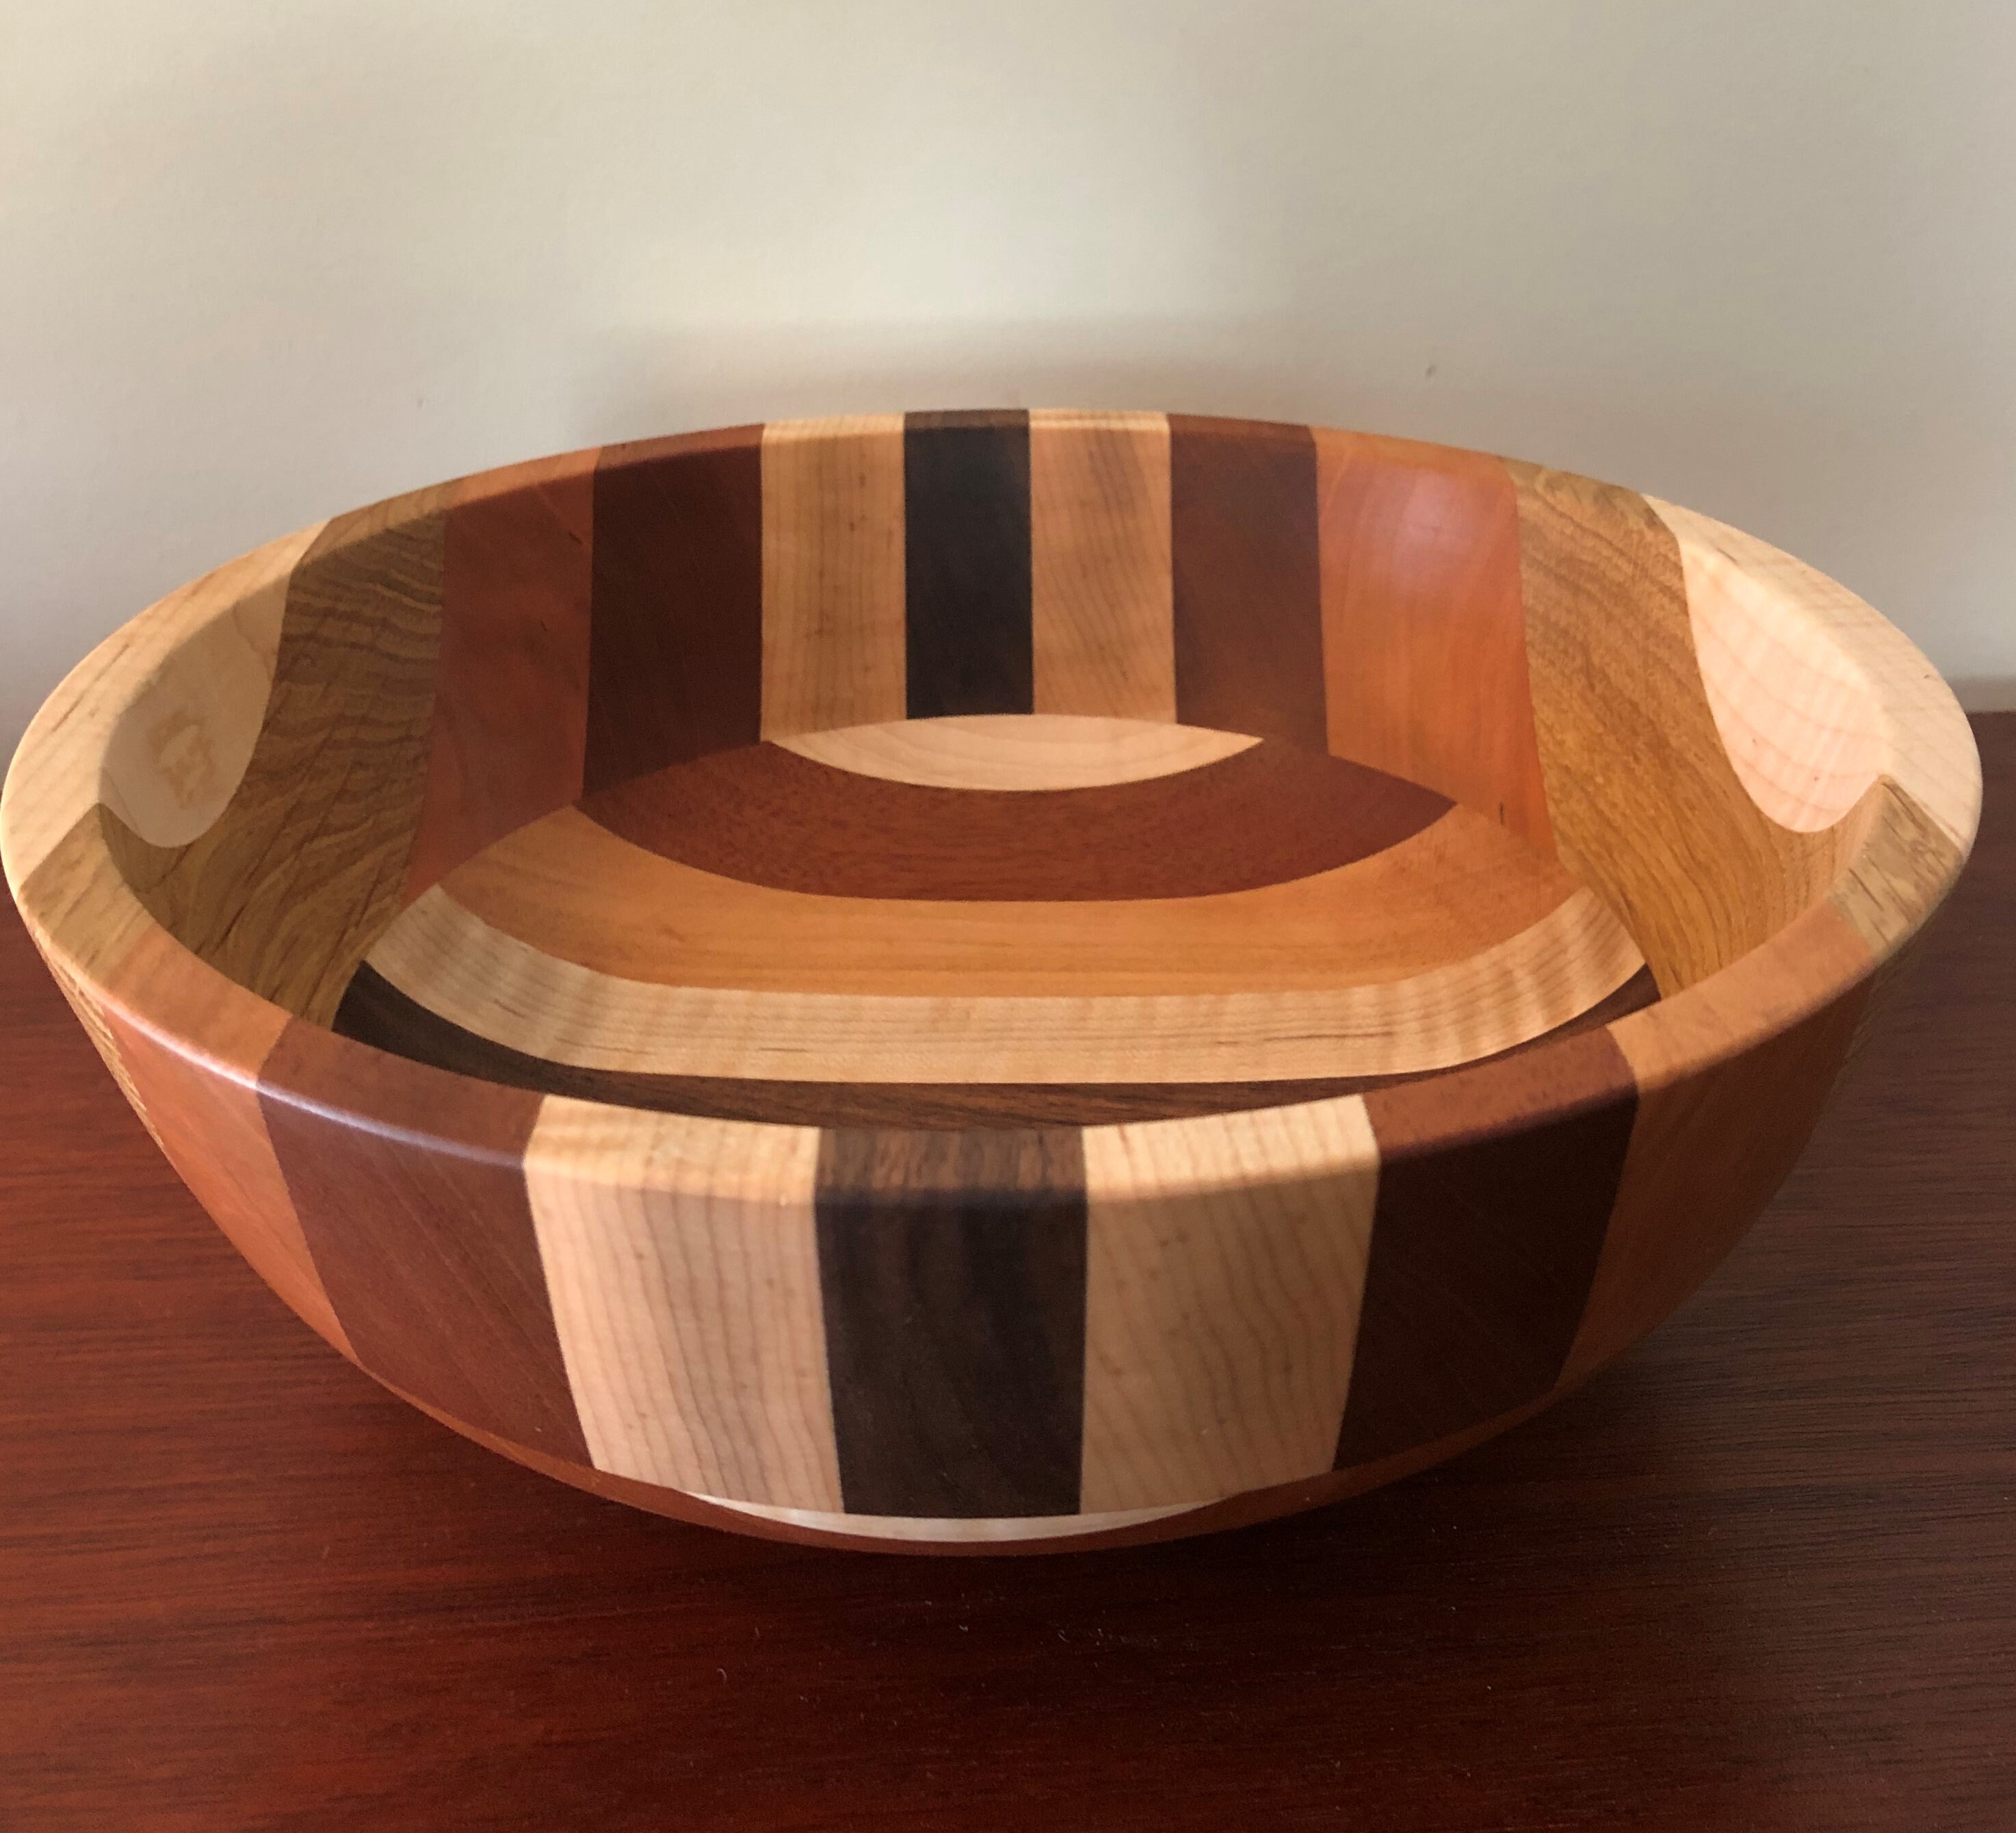 Laminated wooden bowl 650ml/22oz for grab&bo and takeaway salad